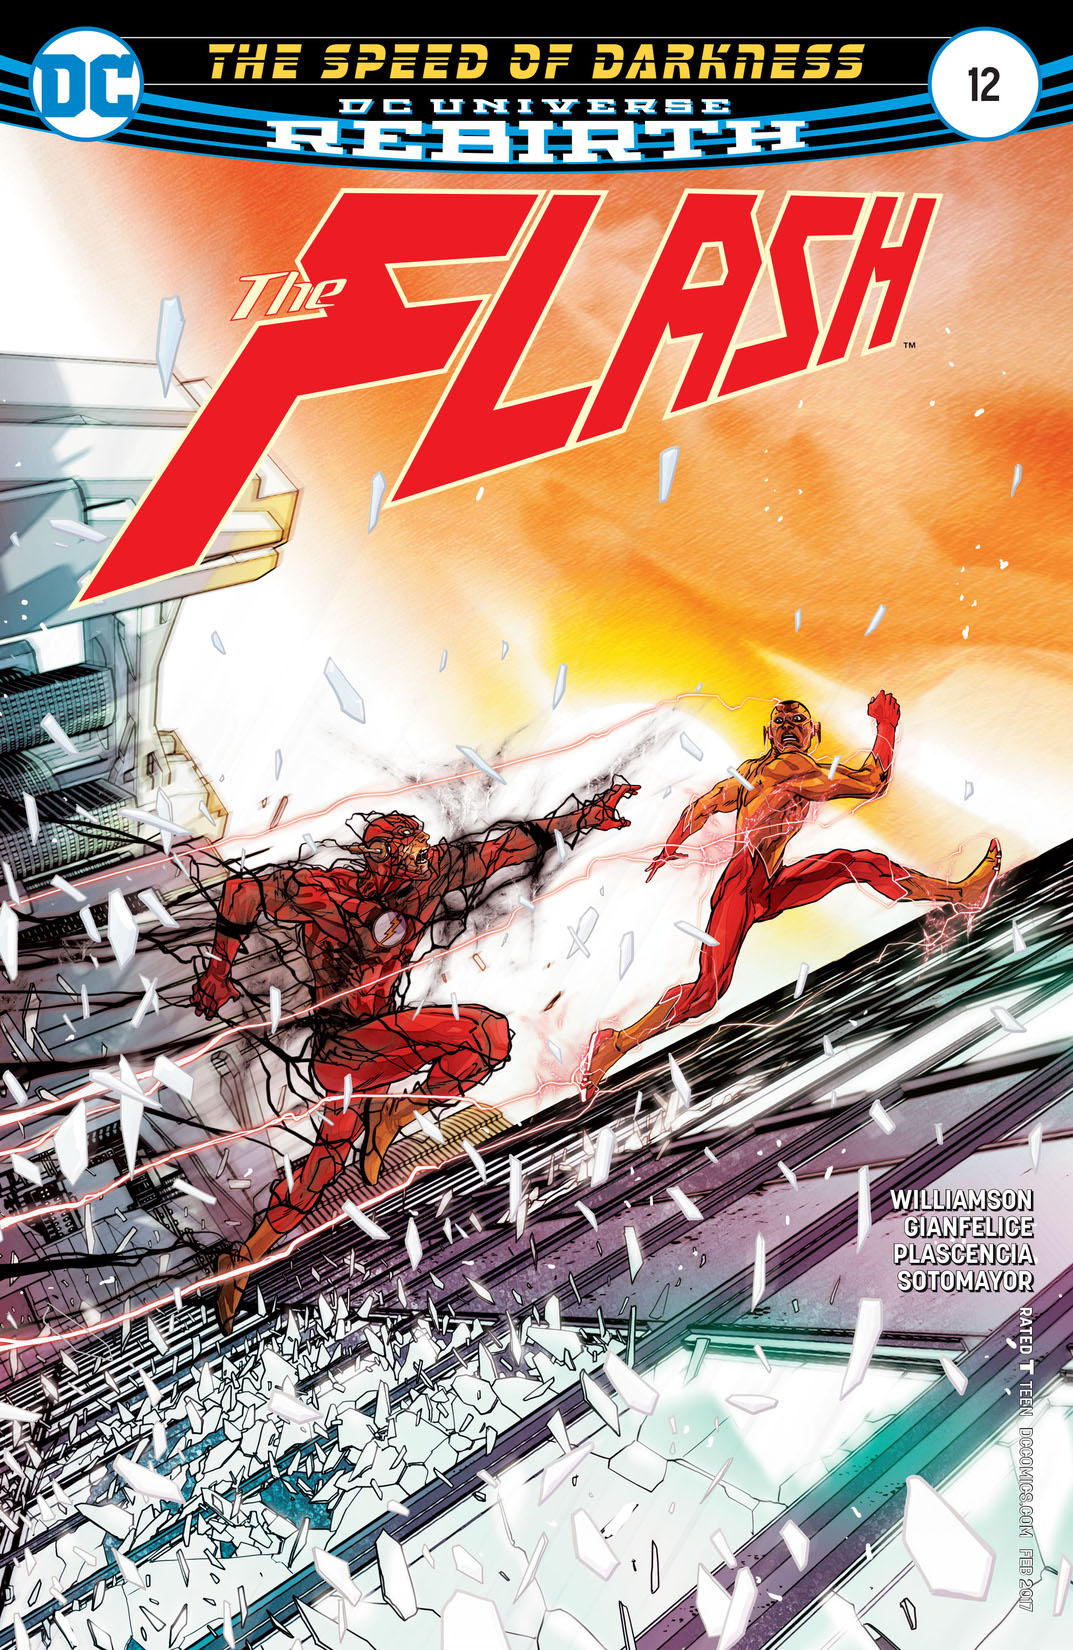 The Flash (2016-) #12 preview images